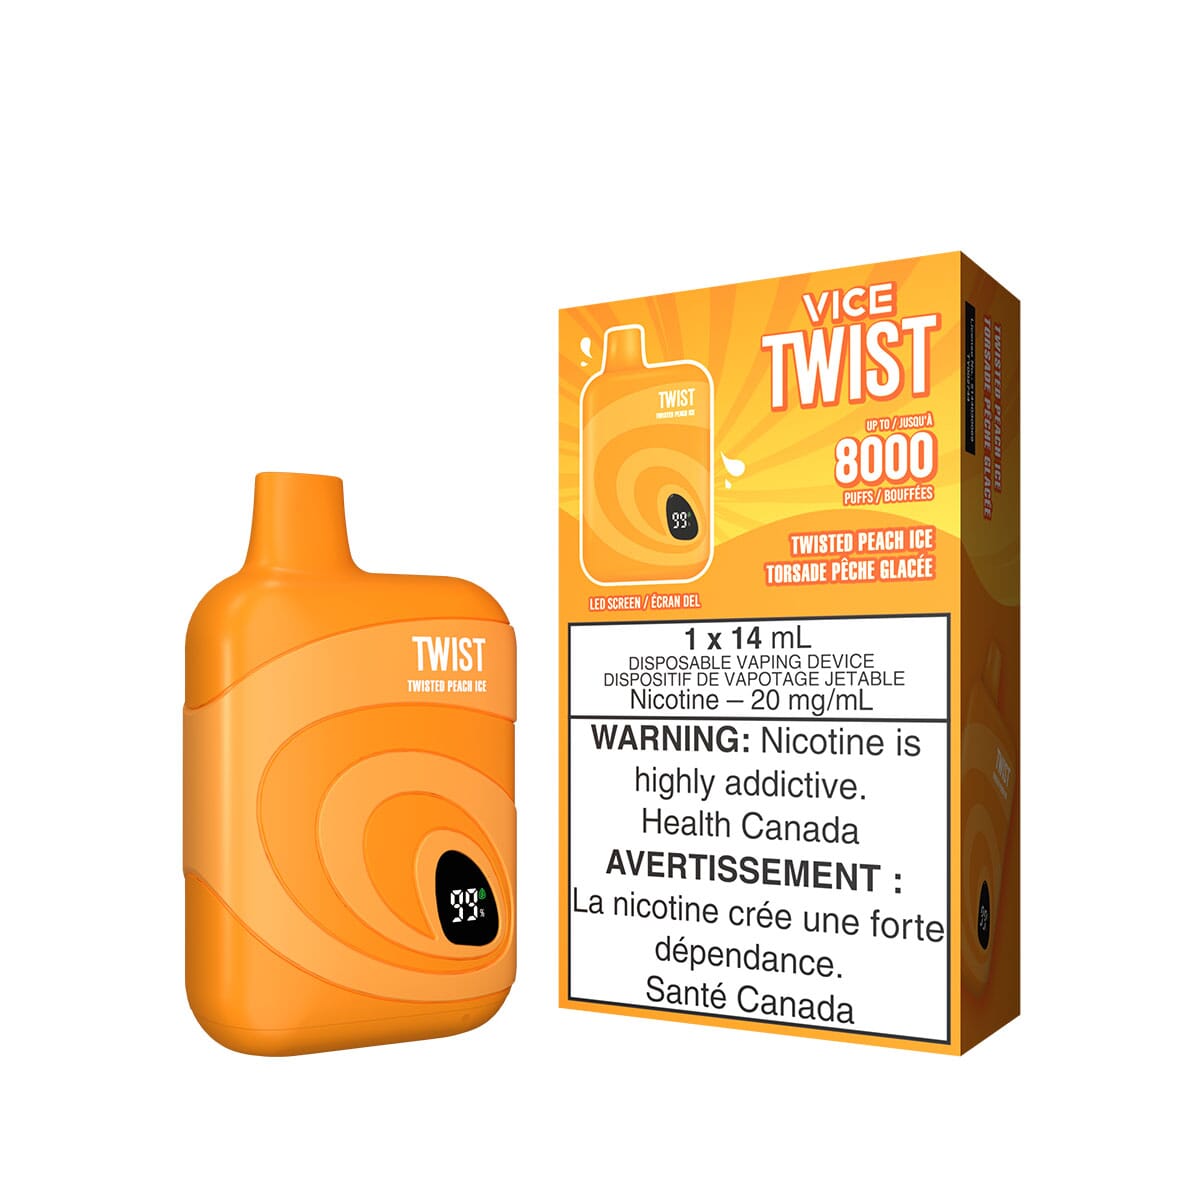 Vice Twist Twisted Peach Ice Disposable Vape Pen Disposable Vice 